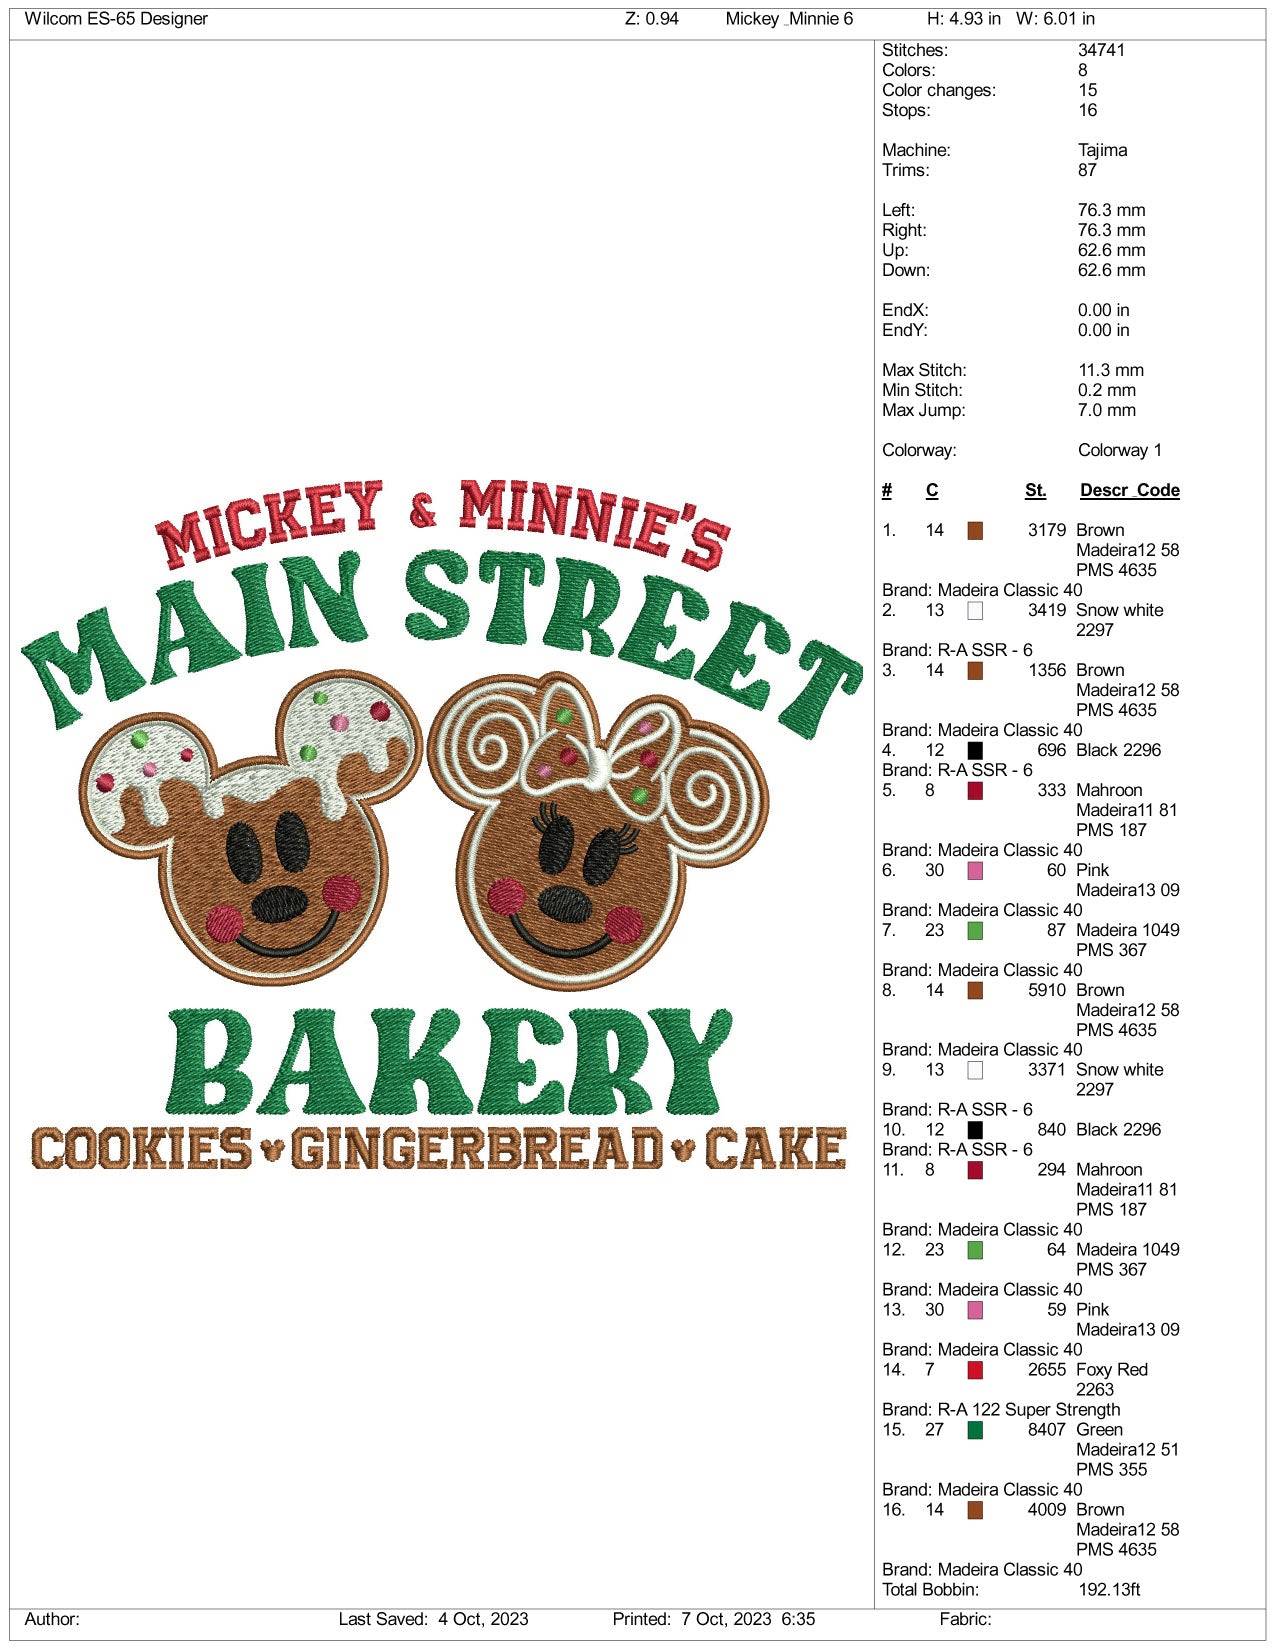 Mickey & Minnie Bakery Embroidery Design Files